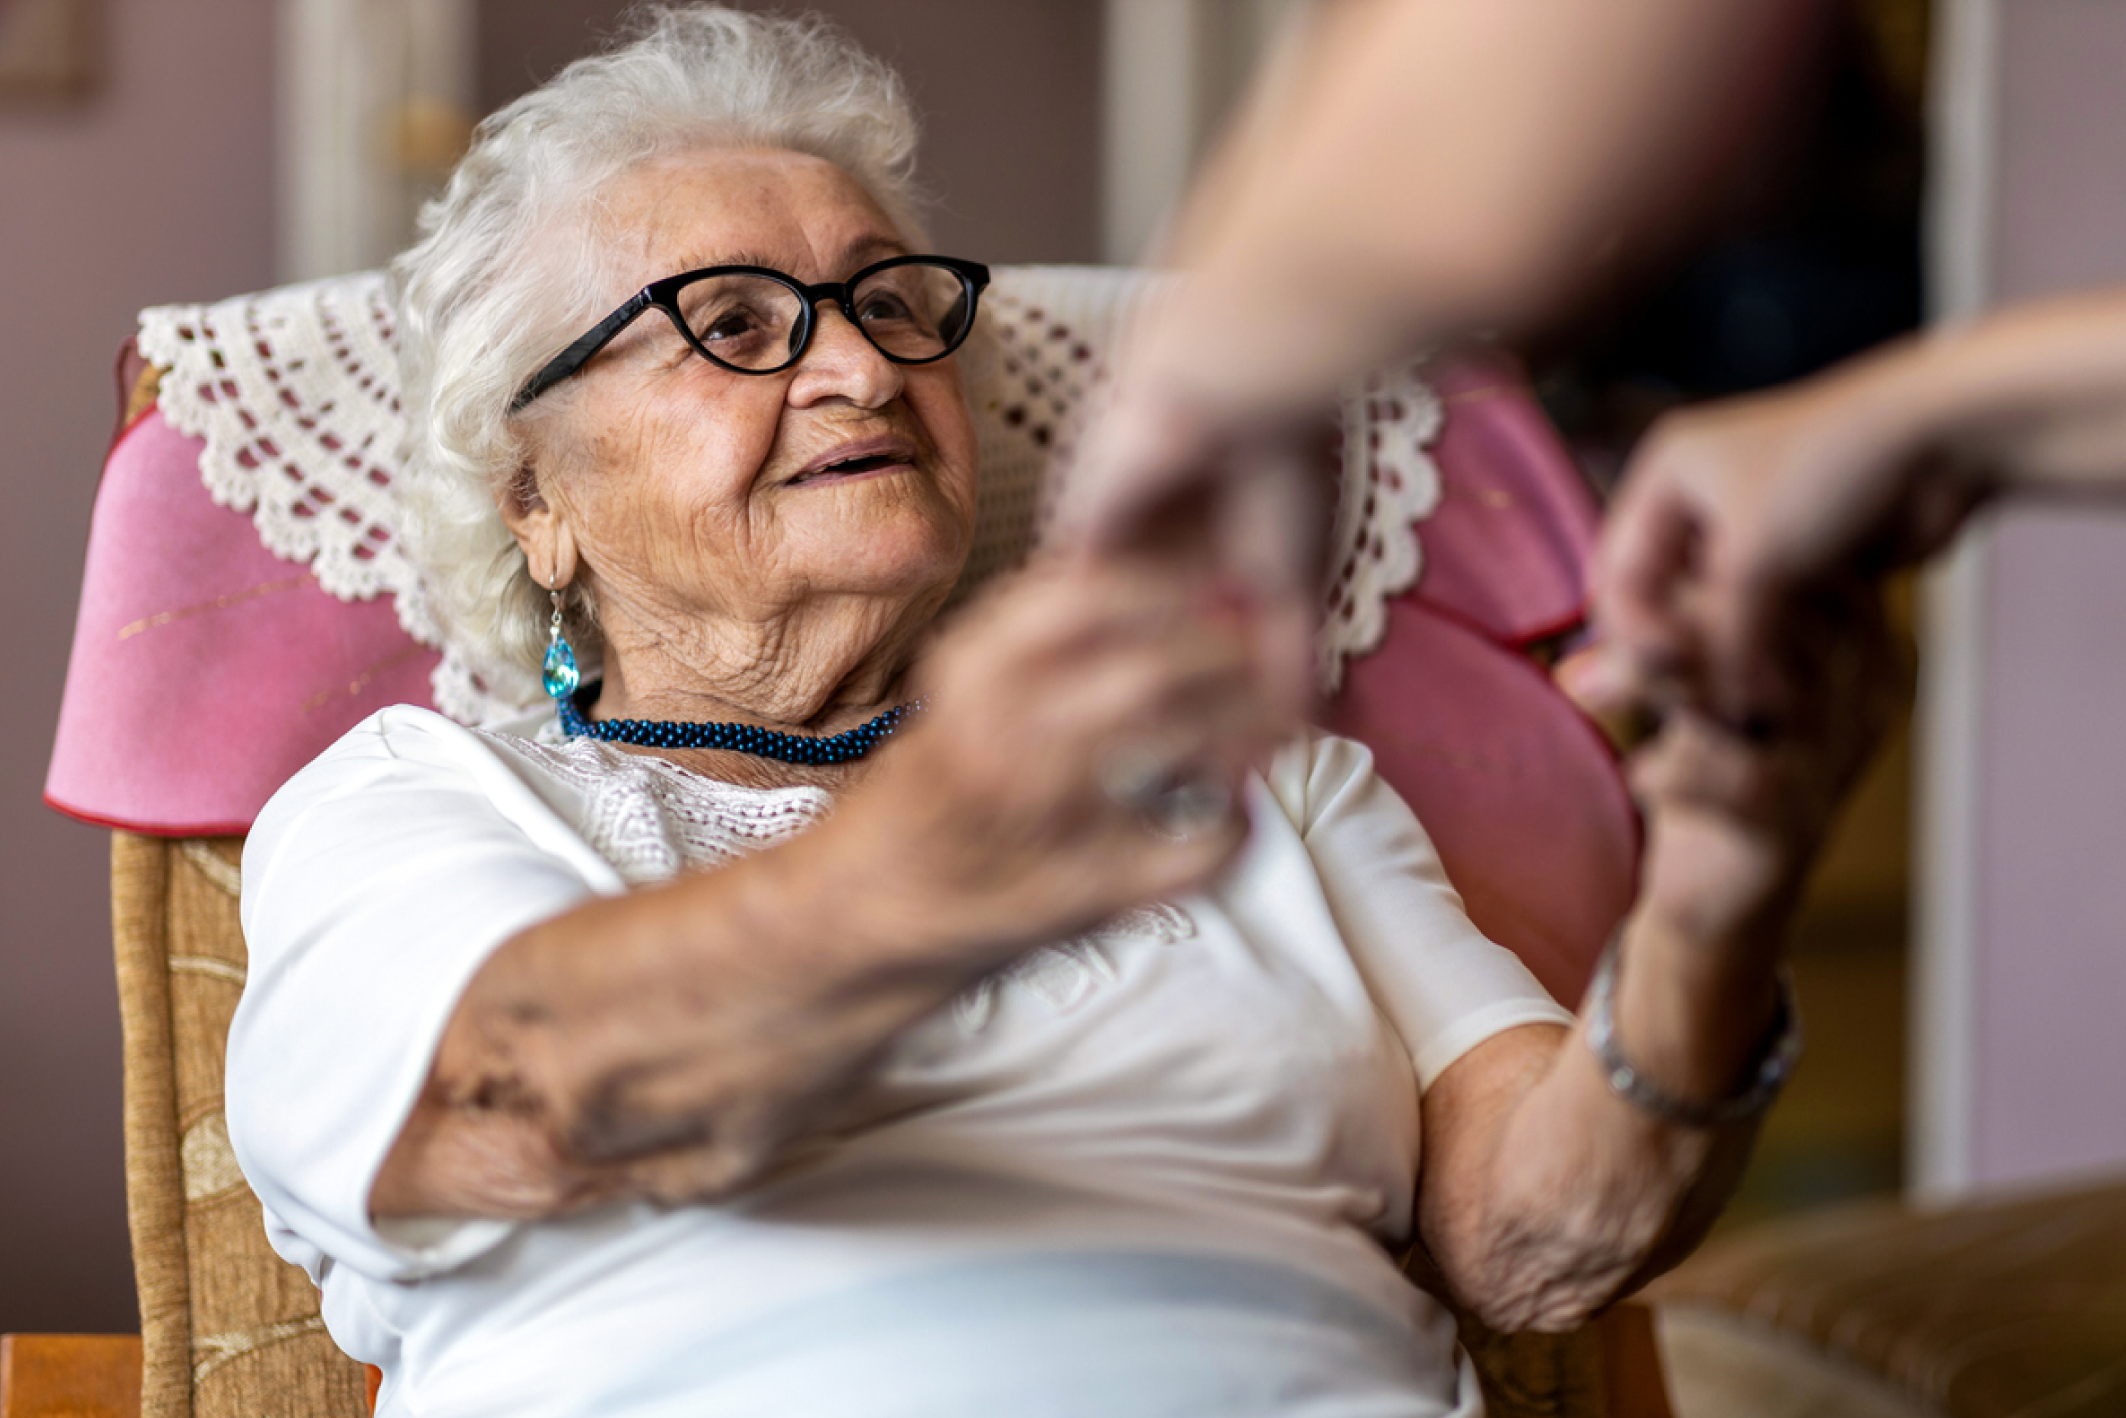 A home care worker helps an older adult stand up from an armchair.